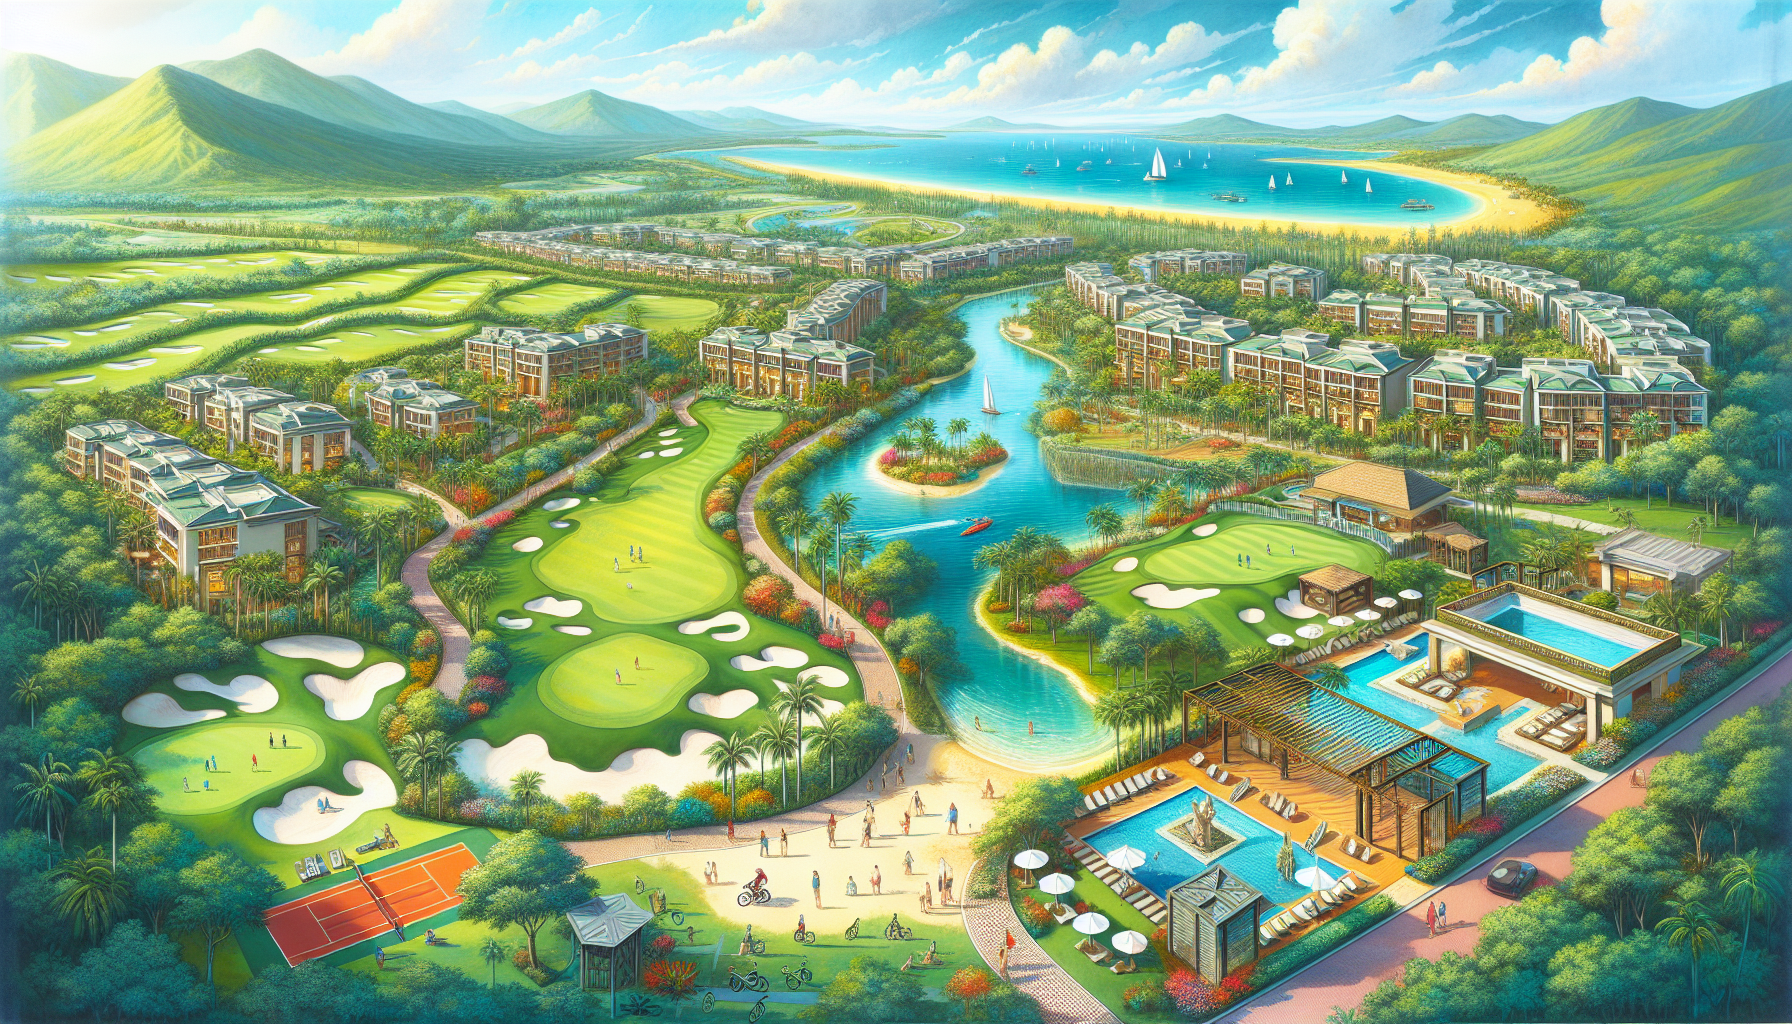 Amenities and lifestyle in Shipyard Plantation